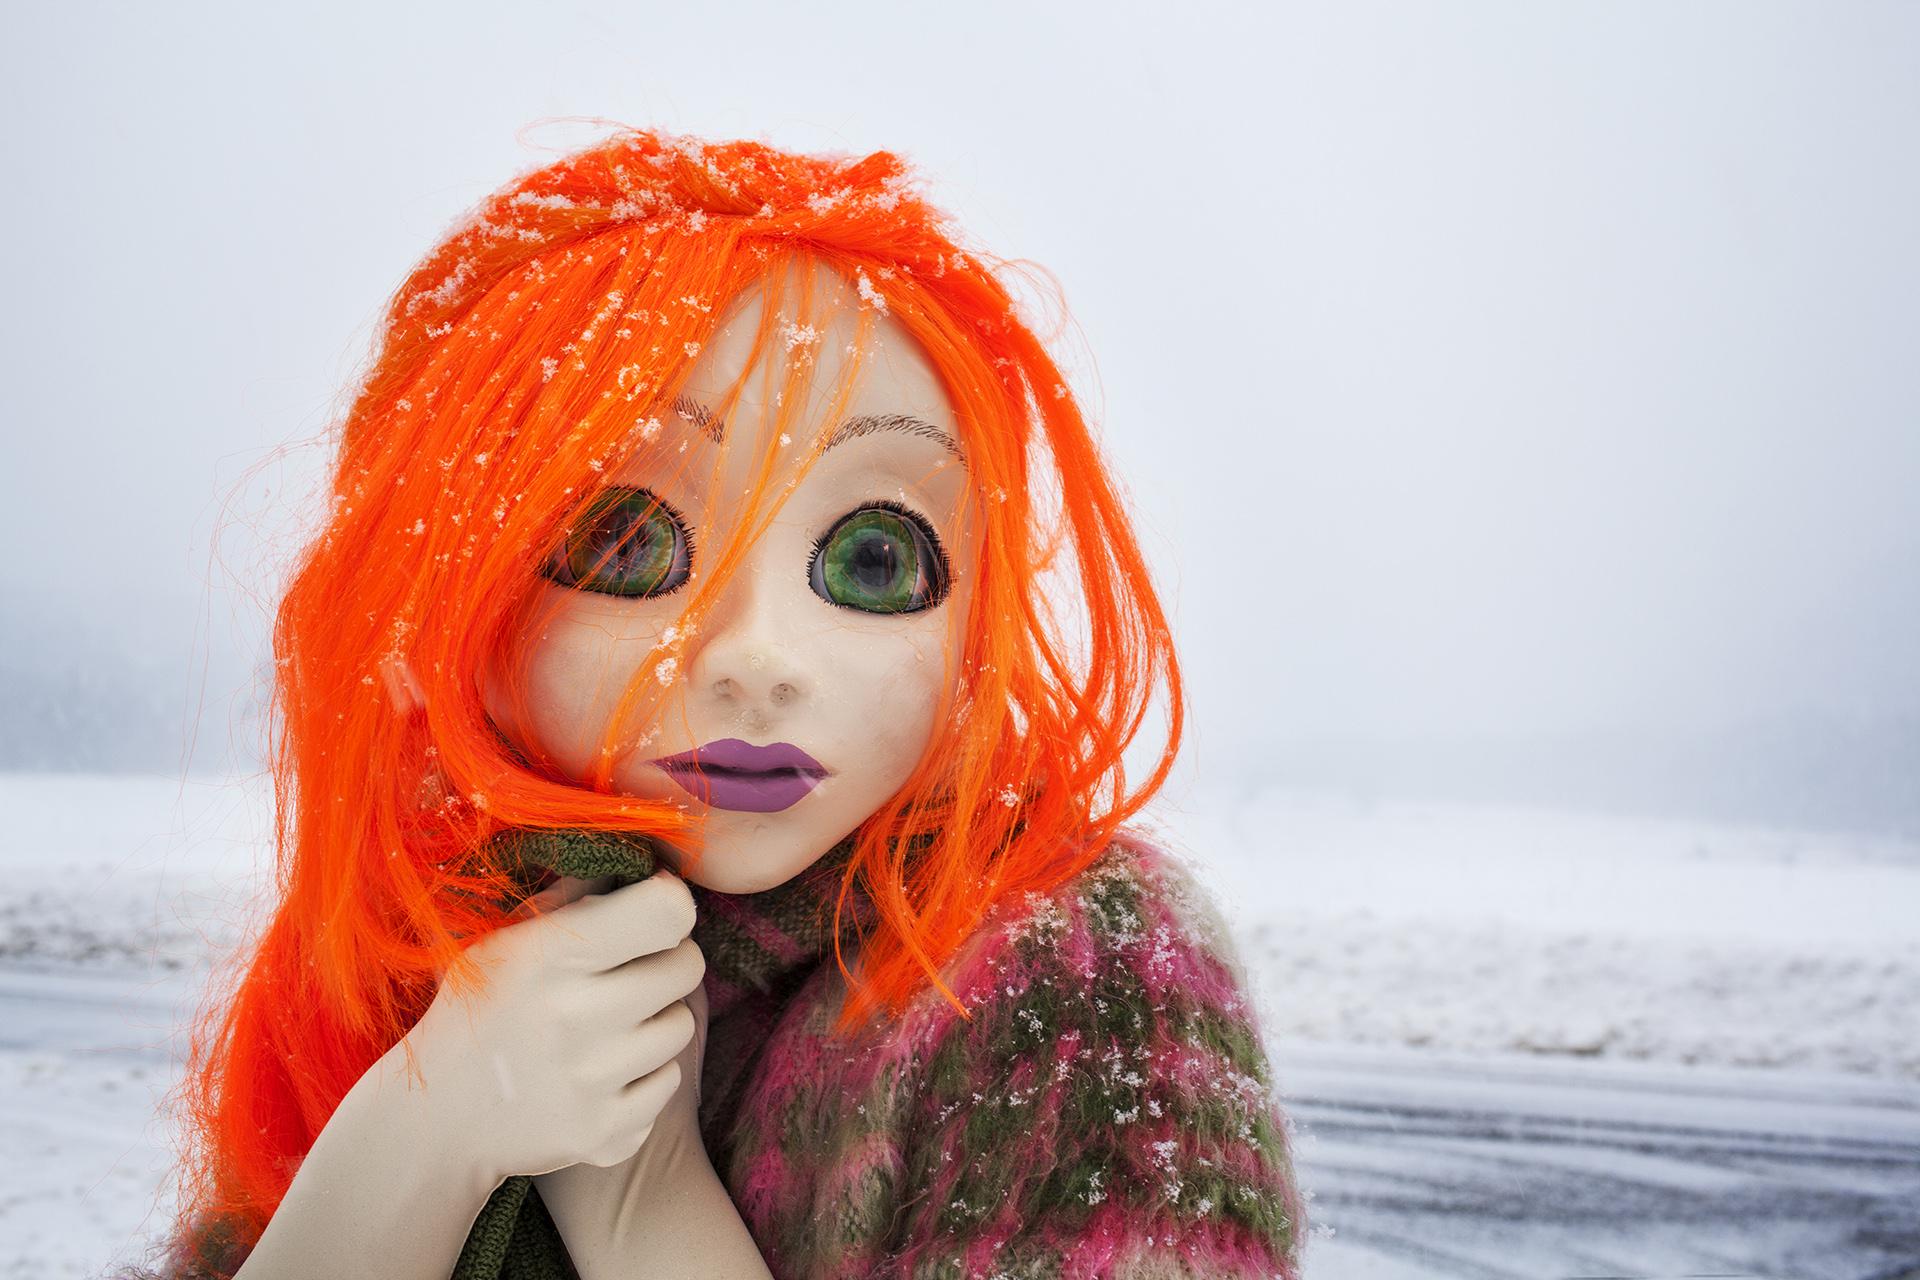 Laurie Simmons, Orange Hair/Snow/Close Up, 2014. Photo: © Laurie Simmons, courtesy of the artist and Salon 94.